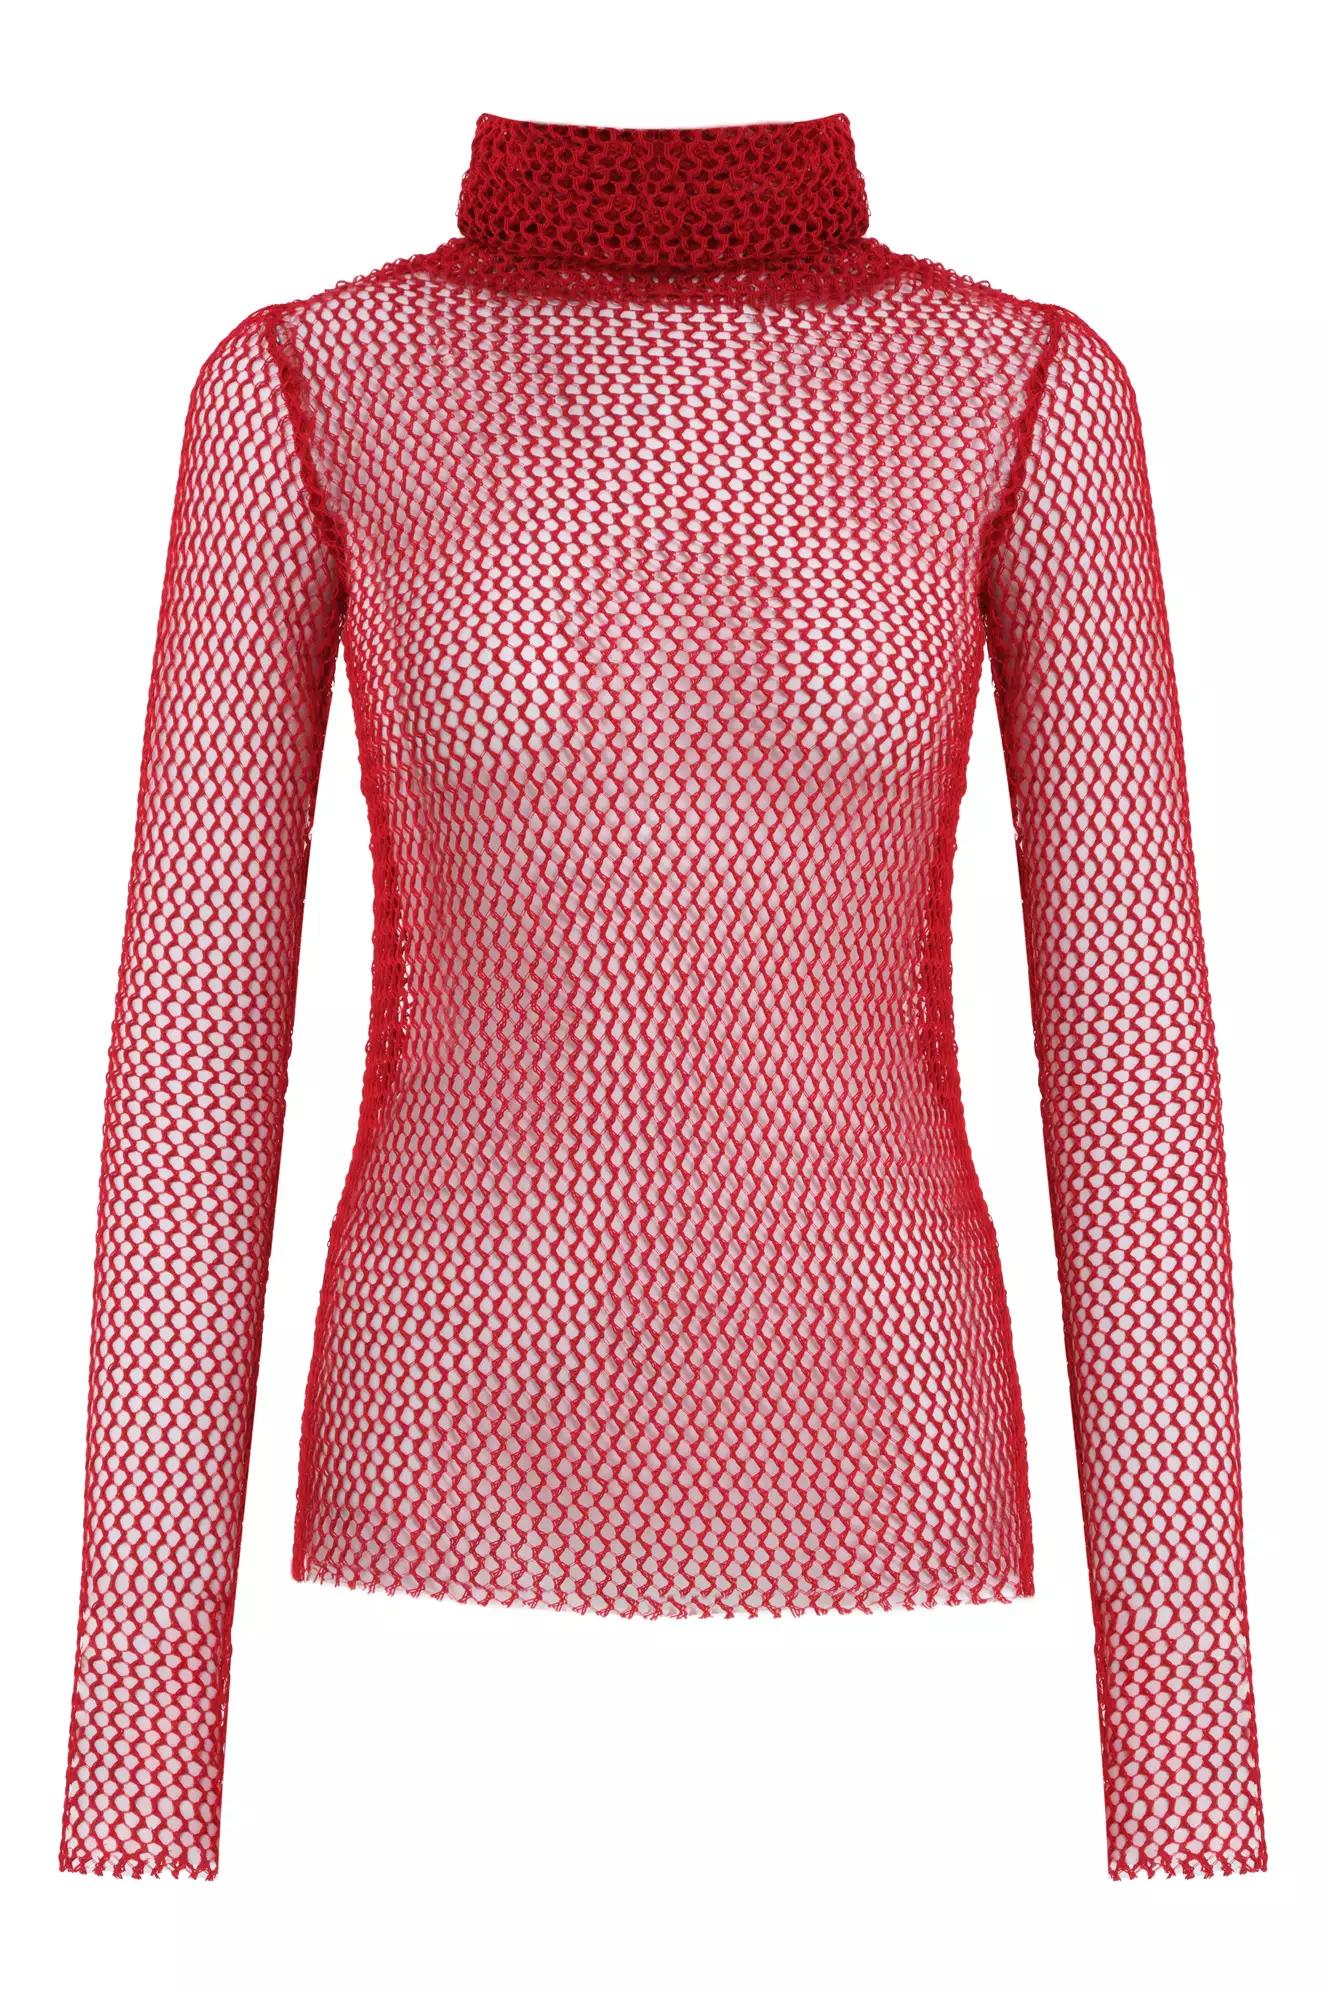 Red file long sleeve shirt